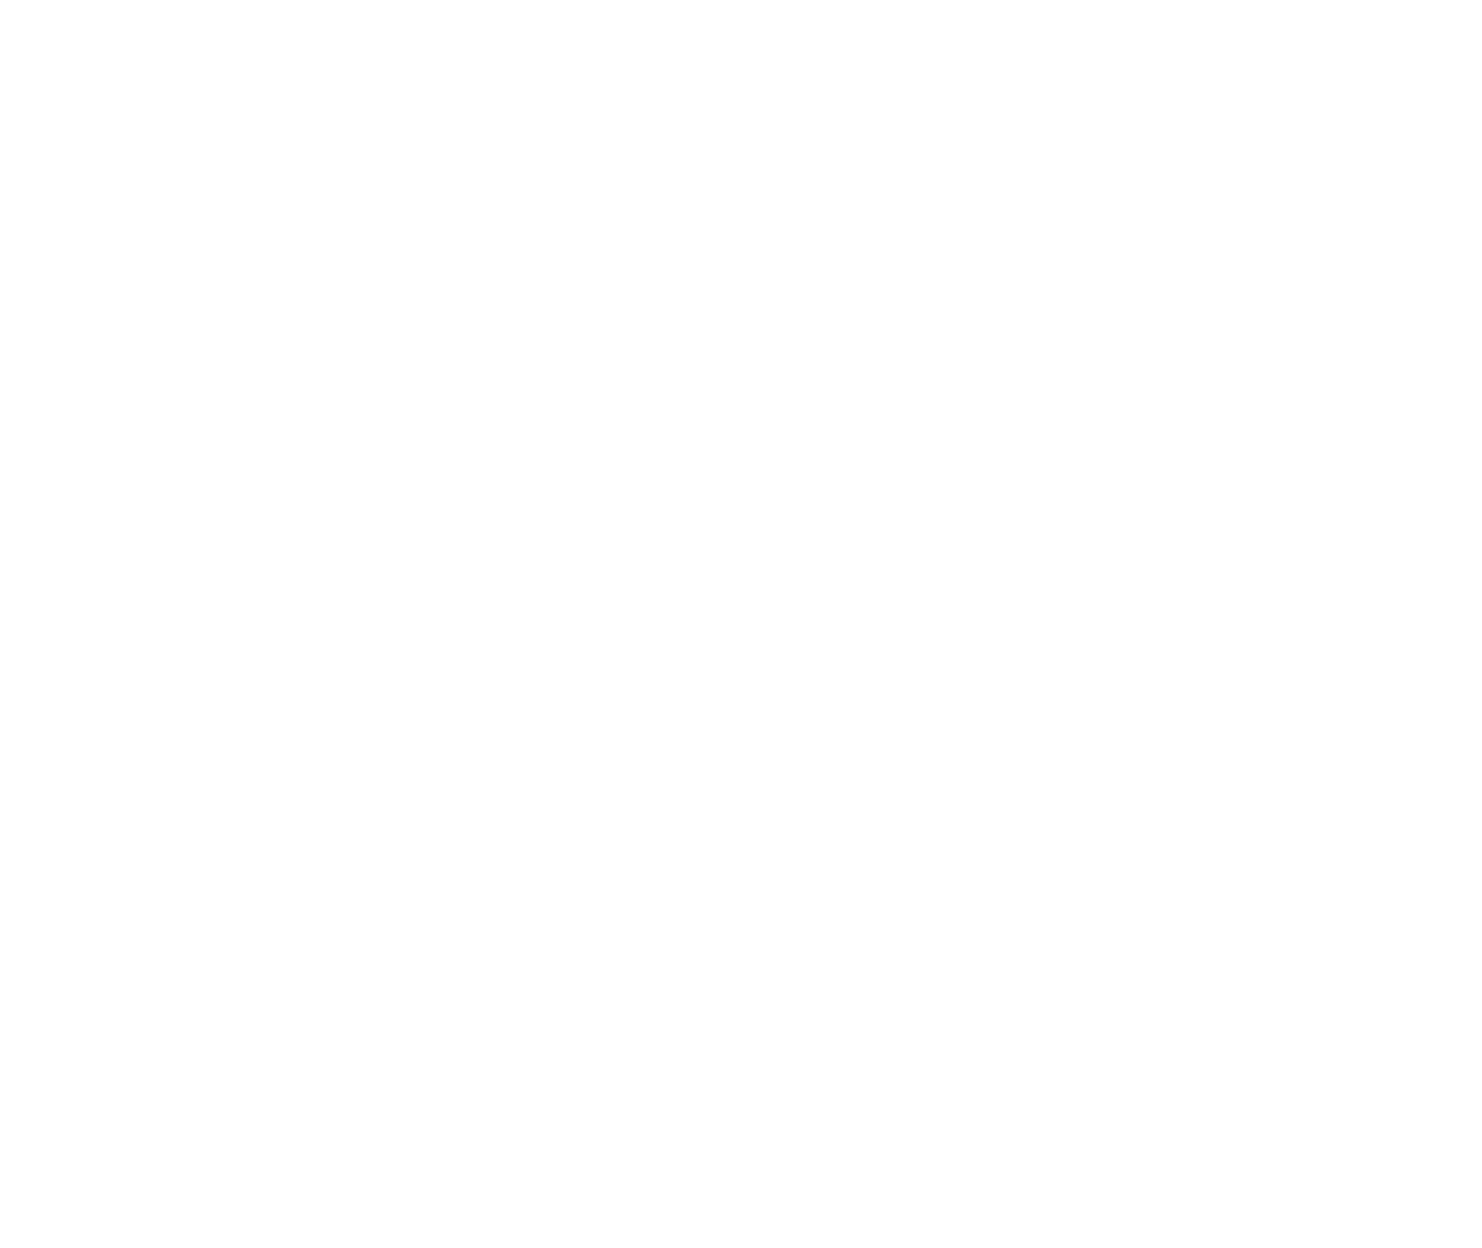 WGM has a highly engaging website